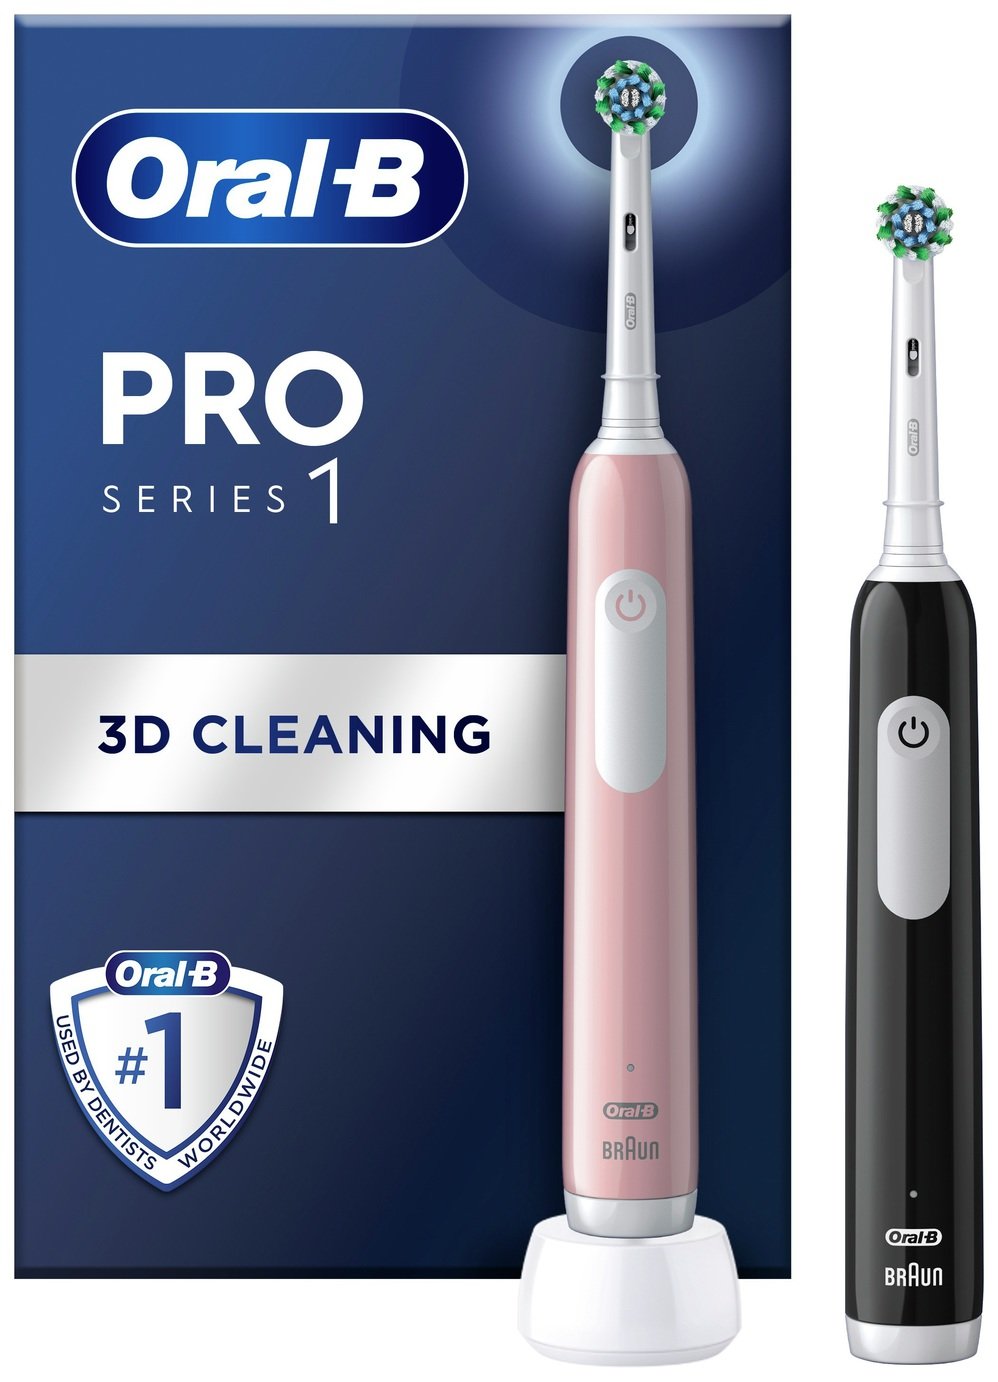 Oral-B Pro Series 1 Electric Toothbrush - Duo Pack